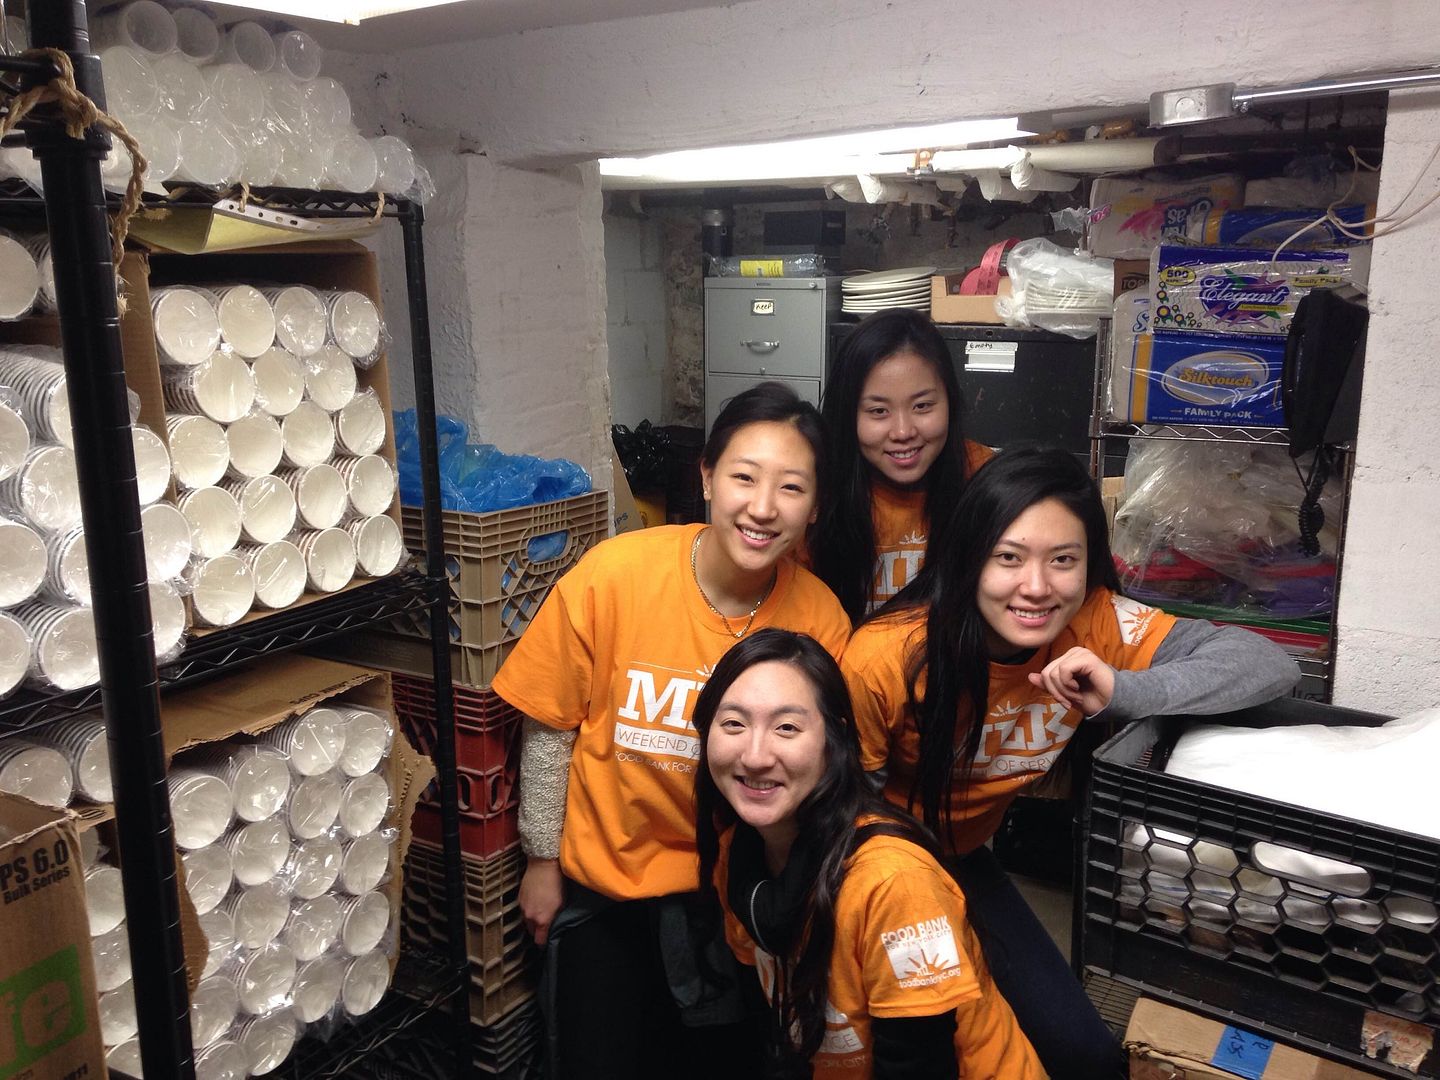 Foodbank NYC offers tons of volunteer opportunities for families